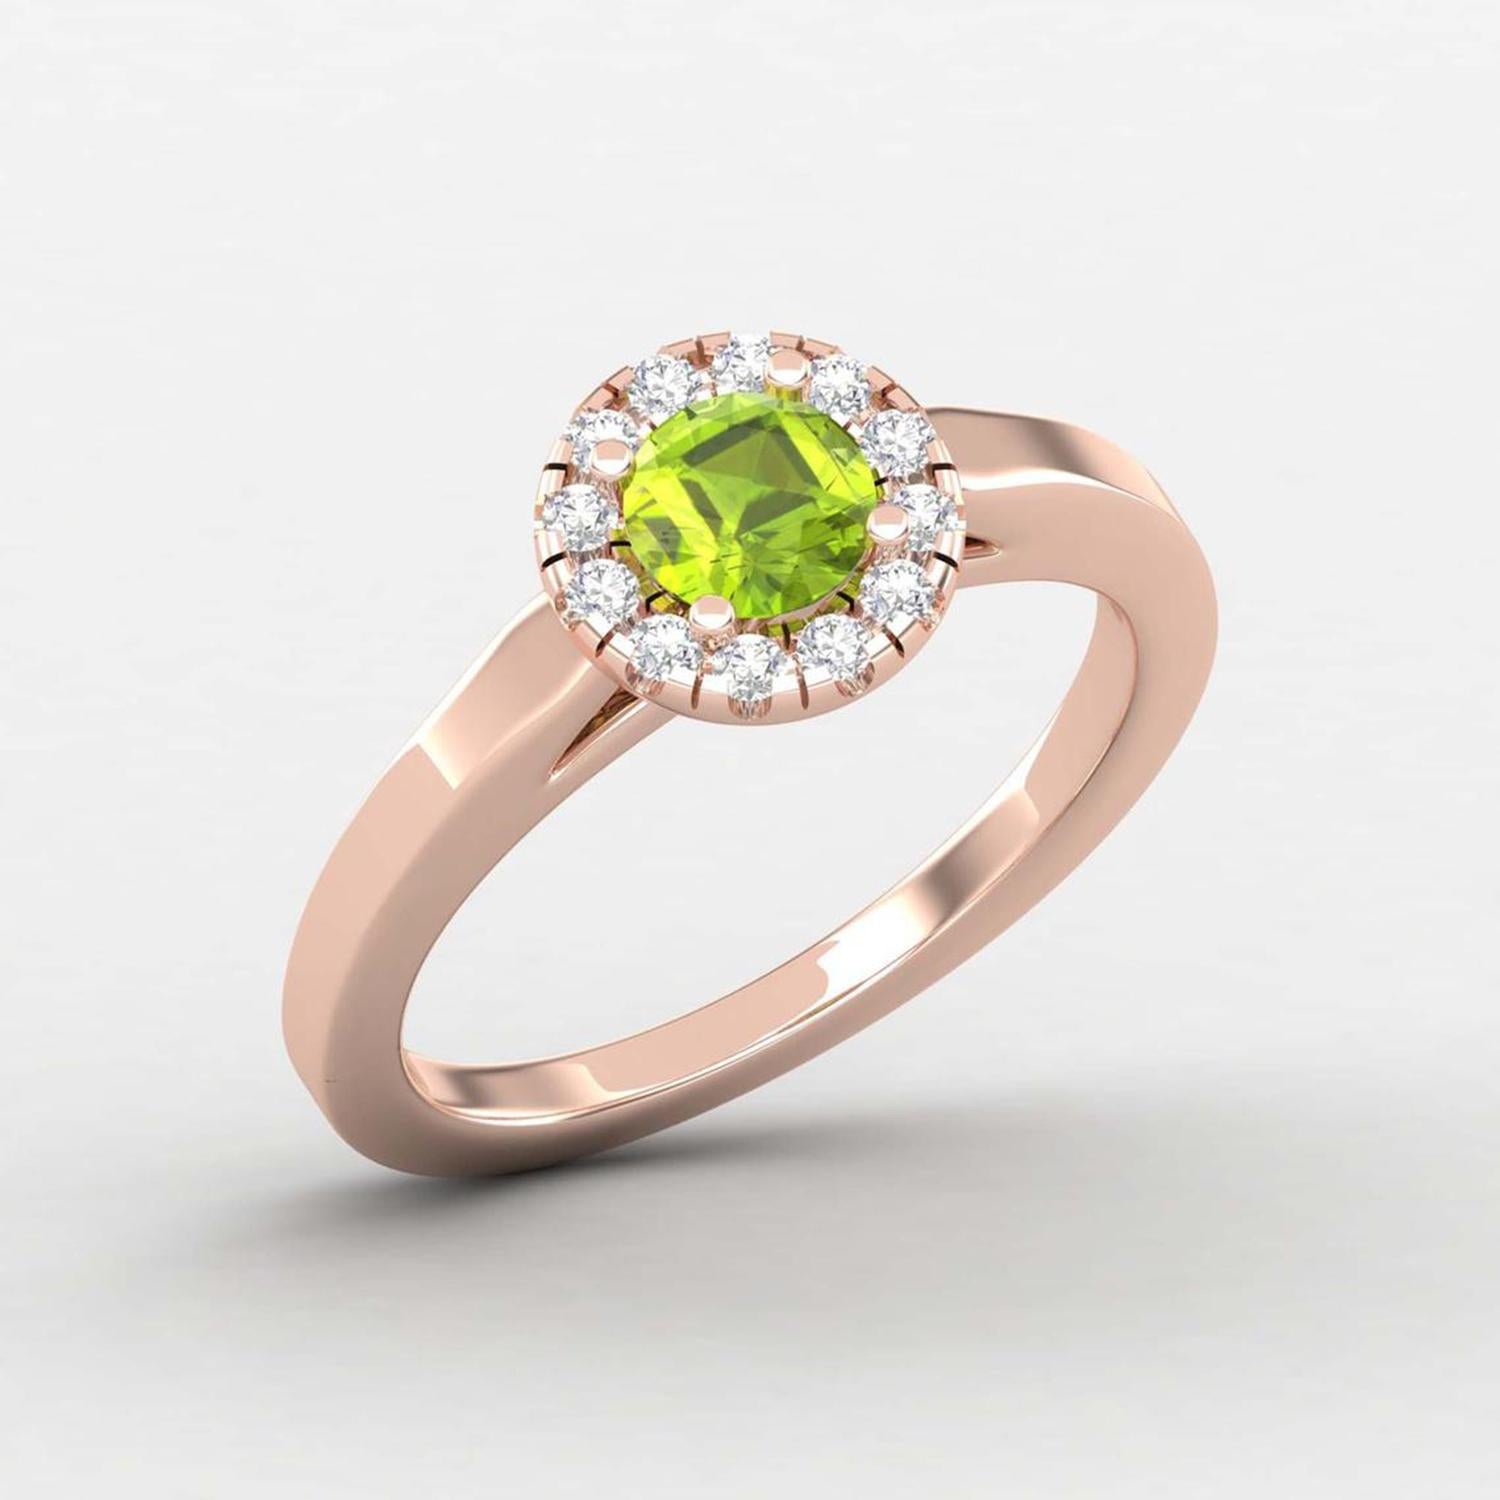 Round Cut 14 Karat Gold 5MM Round Peridot Ring / 1.5MM Round Diamond Ring / Solitaire Ring For Sale